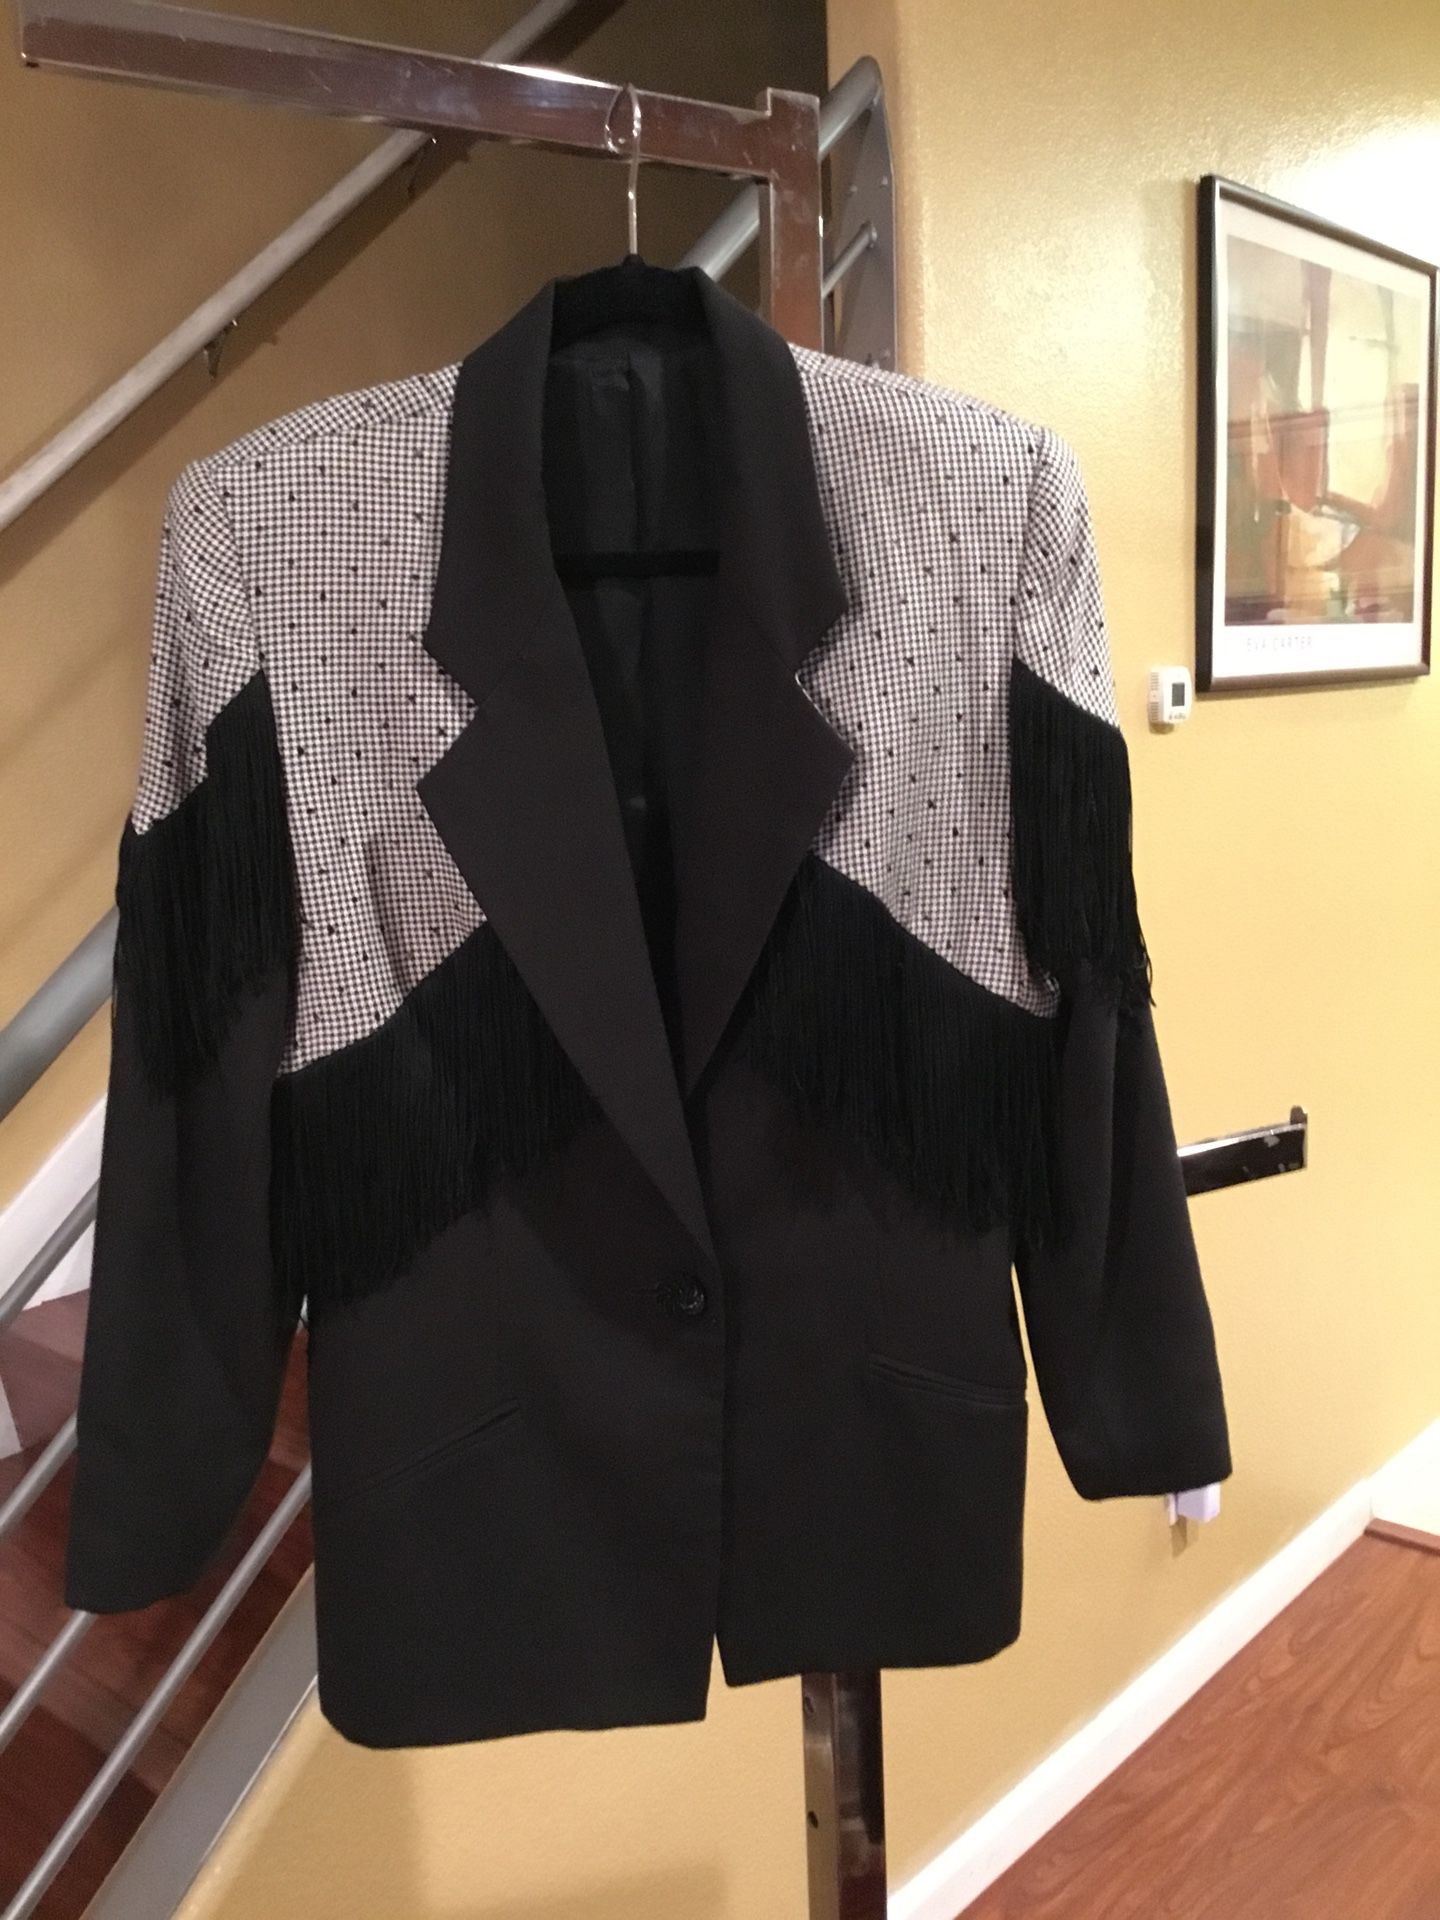 Designer-Black & white skirt suit with fringes/ size 12 - good condition